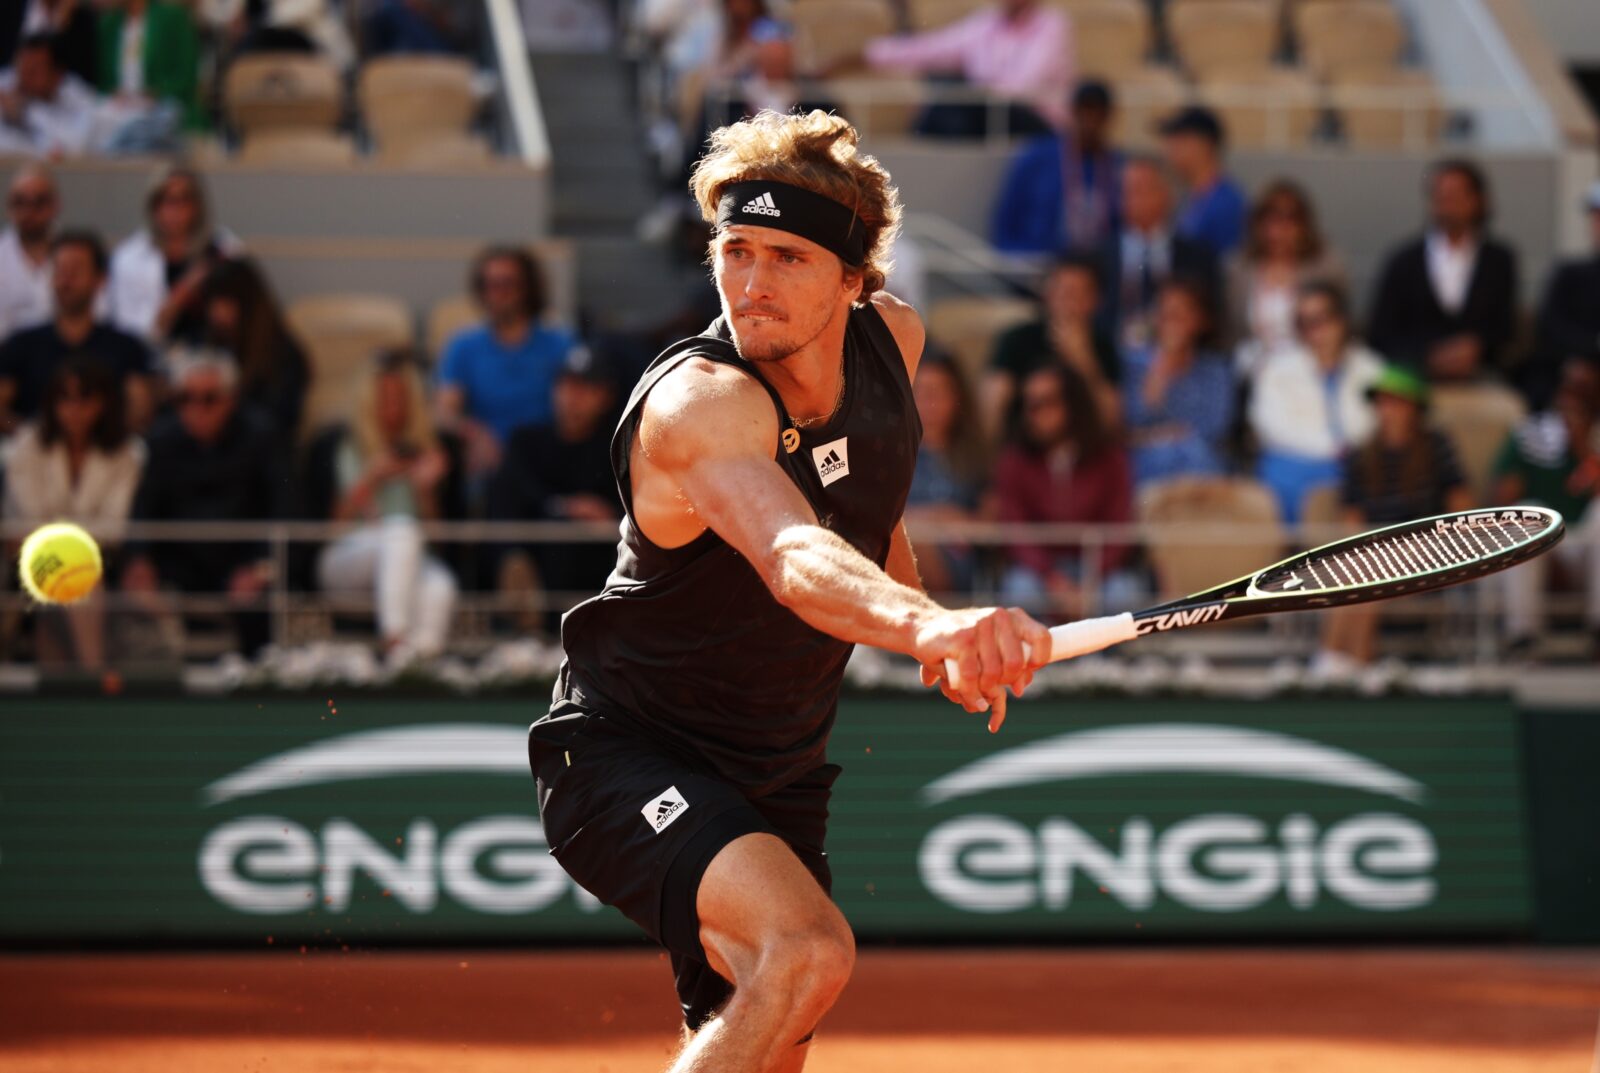 French Open Quarterfinals LIVE: Alexander Zverev defeats Carlos Alcaraz in a four set thriller to advance to French Open semifinals